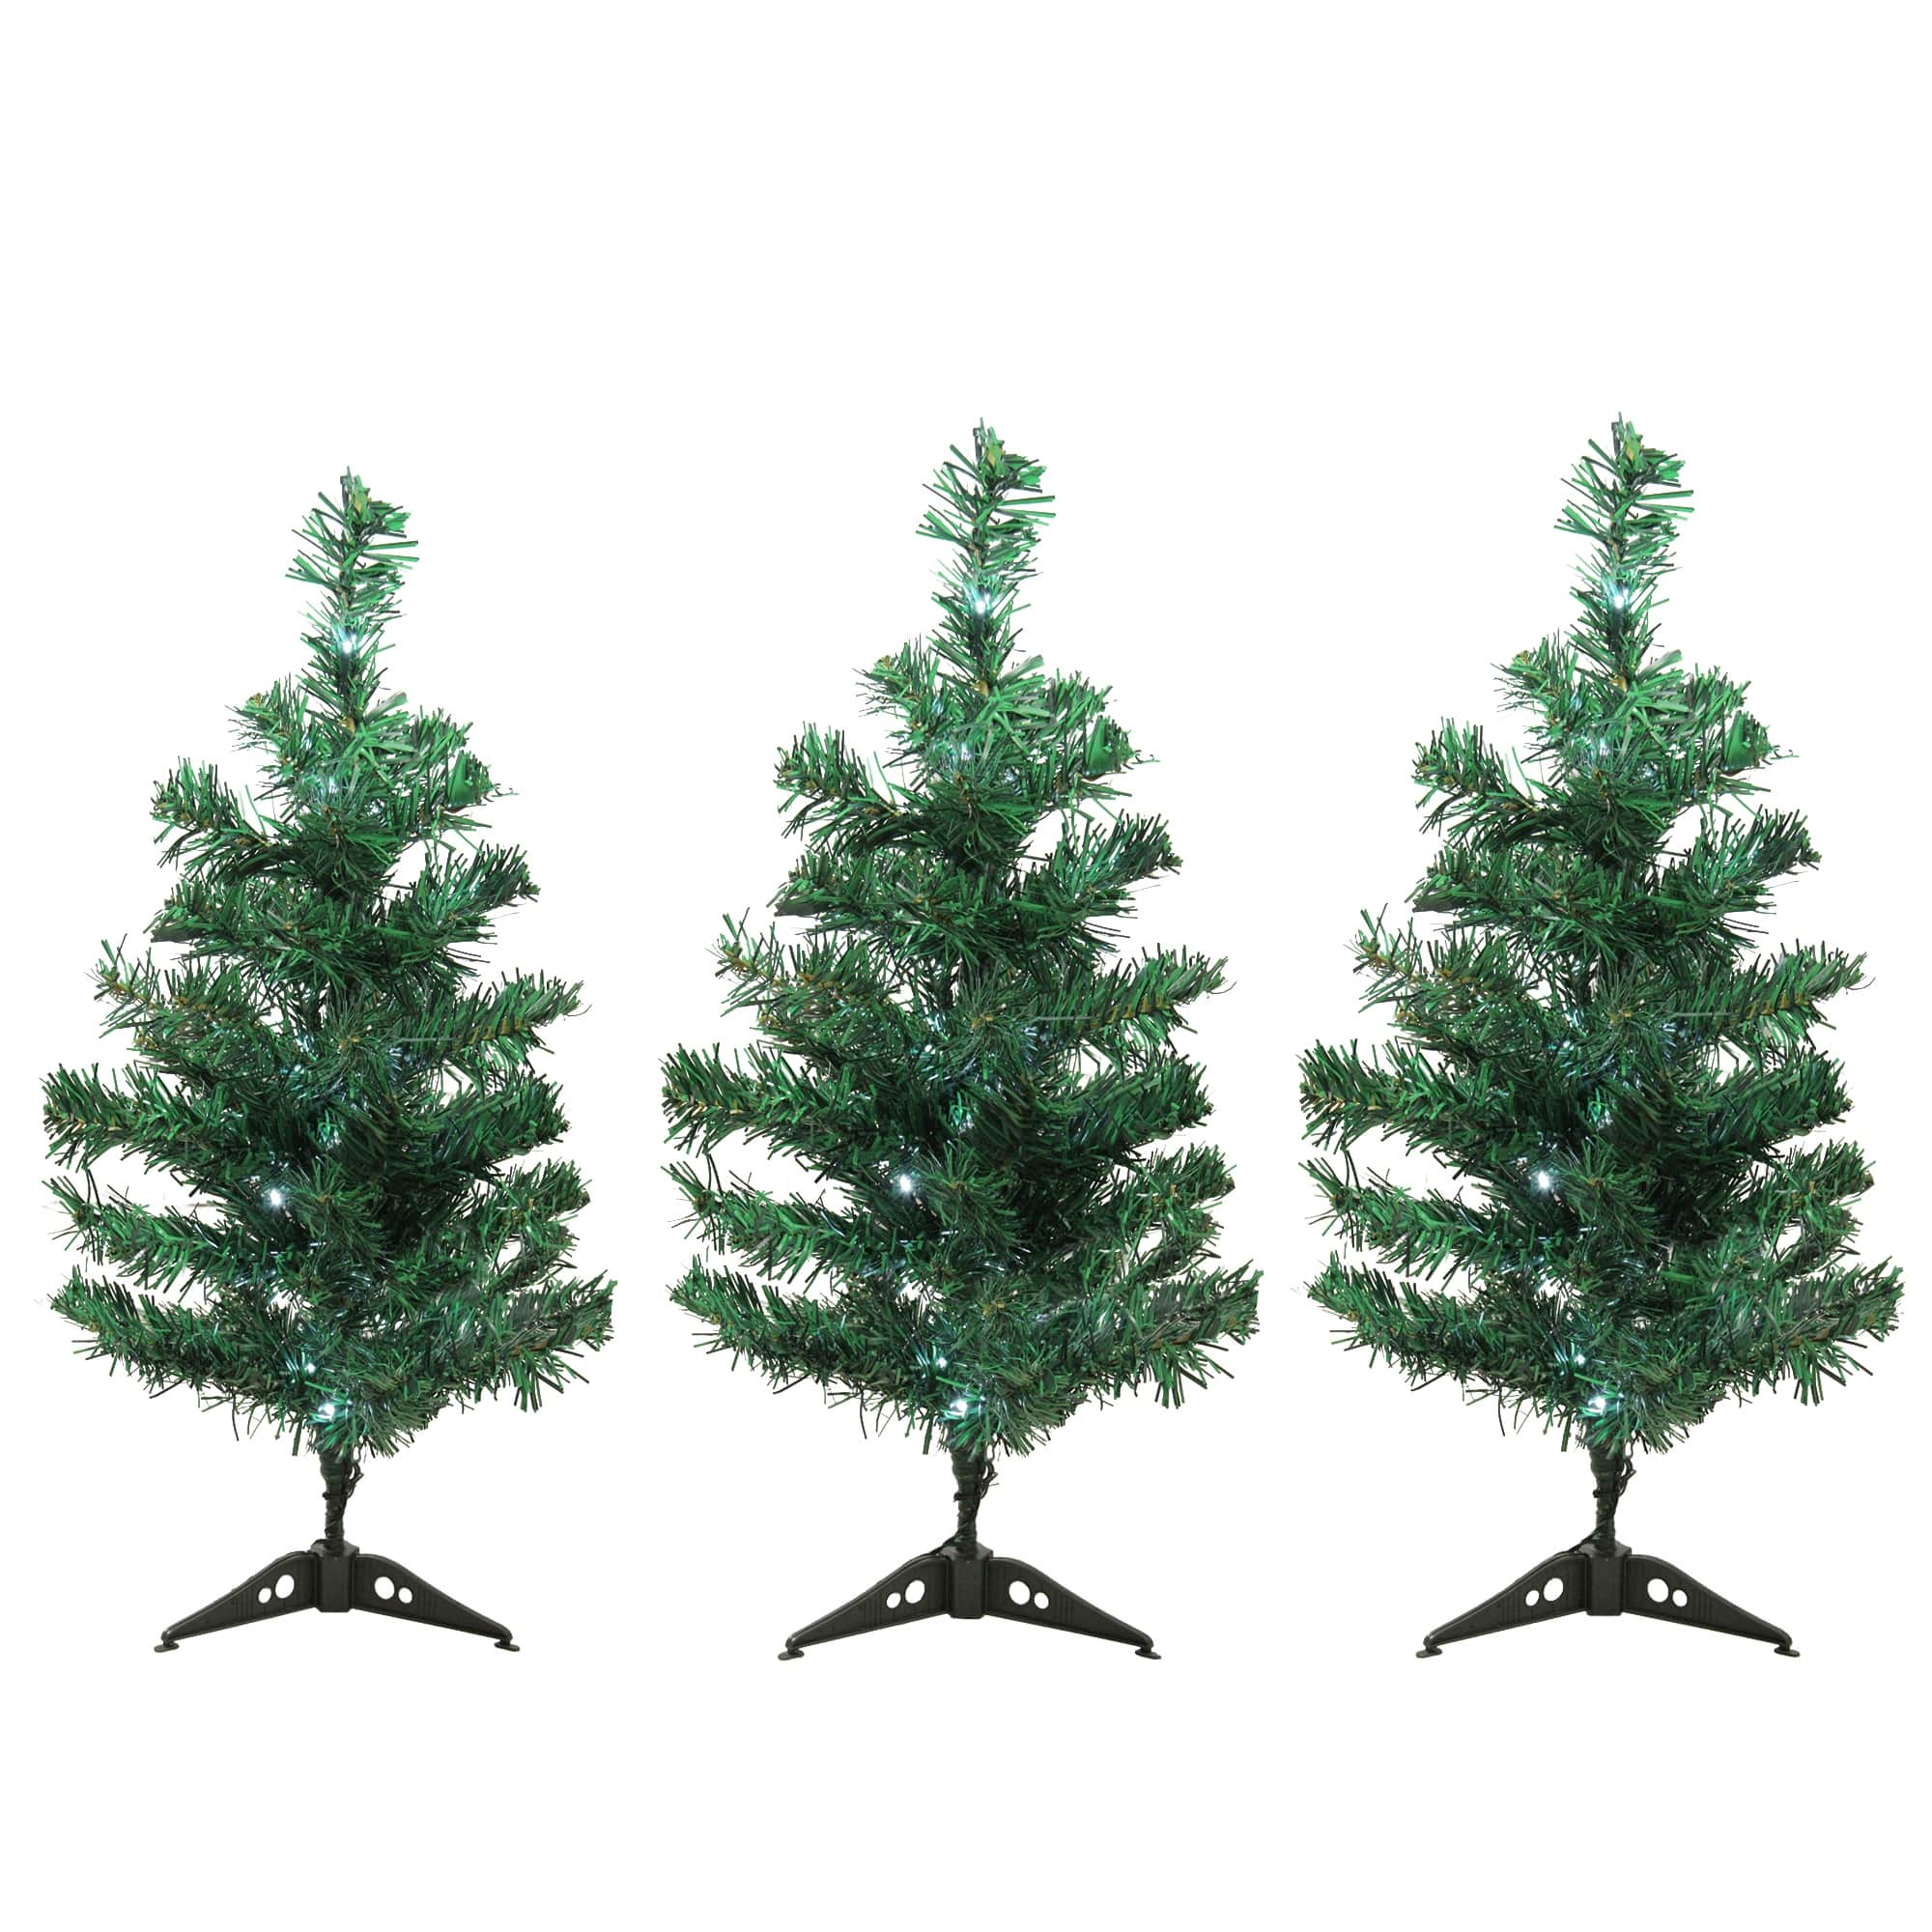 Set of 3 LED Lighted Christmas Tree Driveway or Pathway Markers Outdoor ...